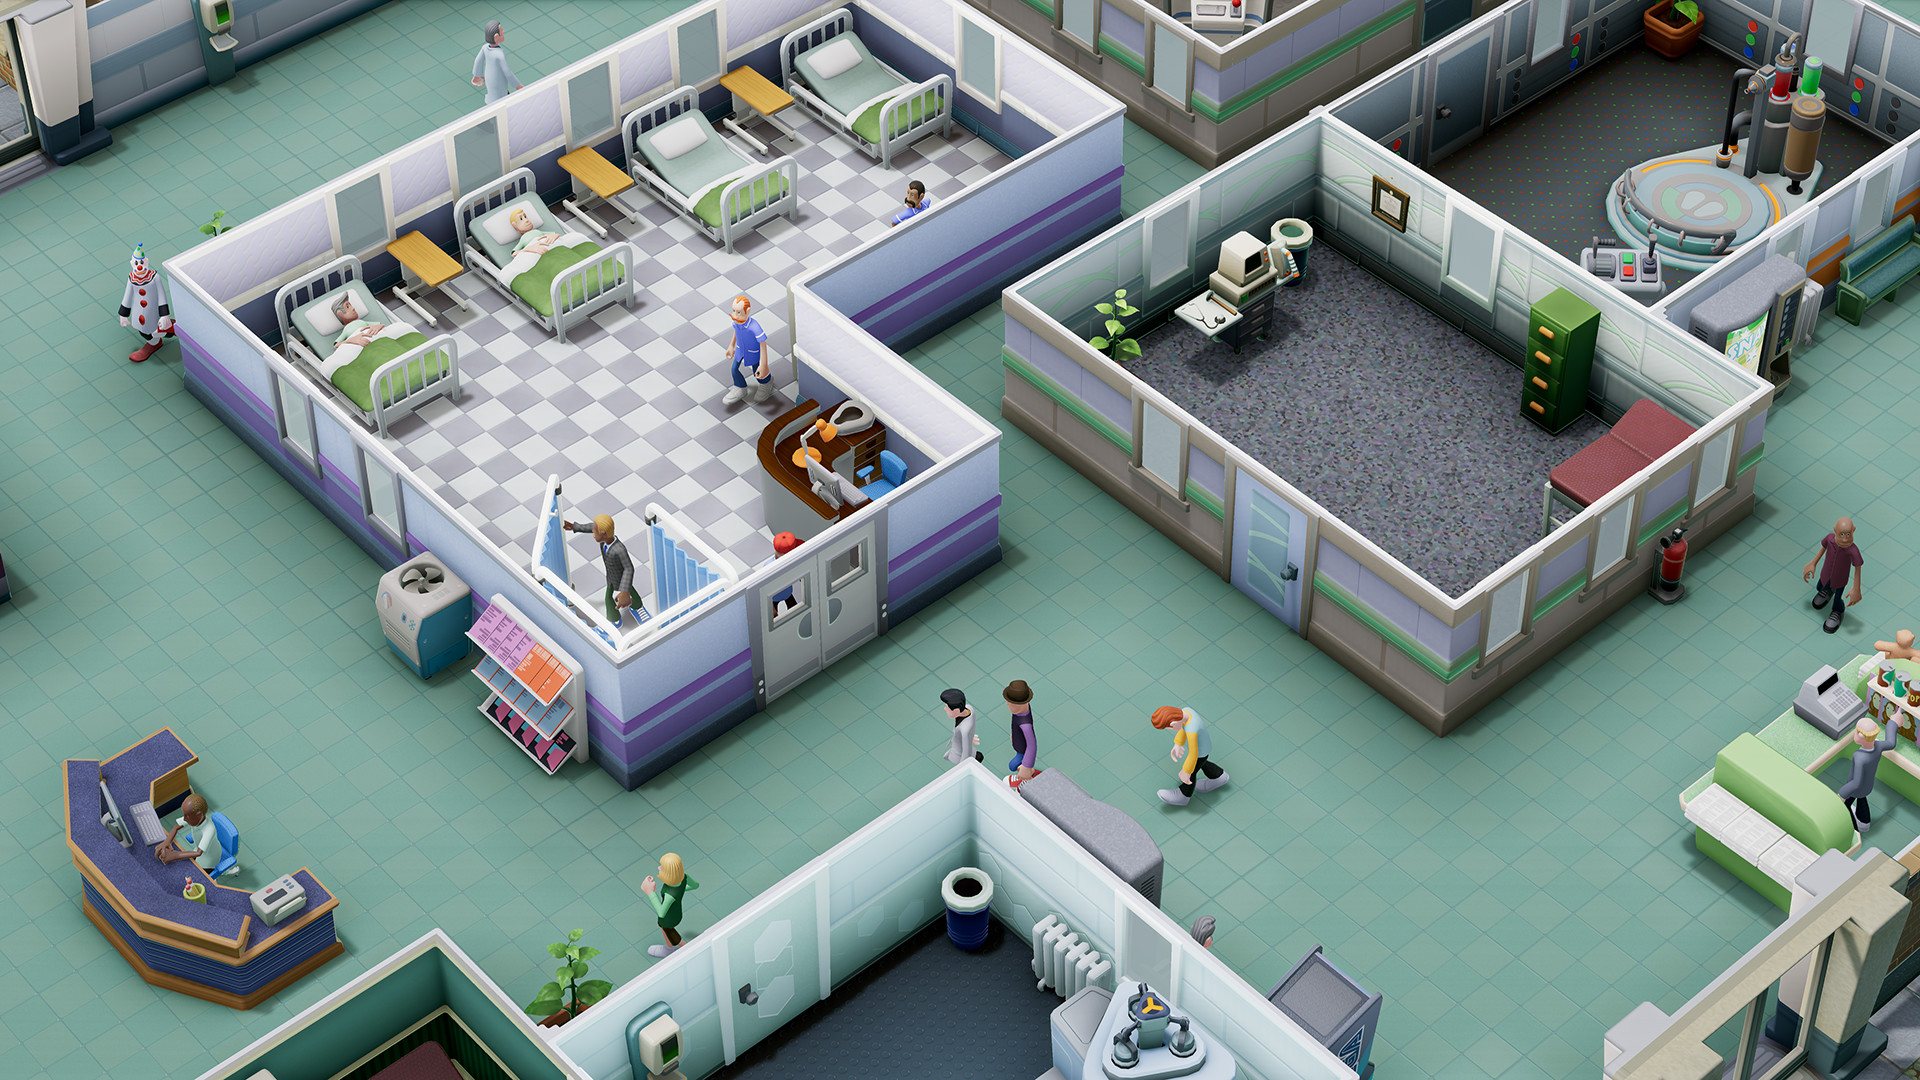 Two Point Hospital: Healthy Collection Vol. 3 Bundle Steam CD Key